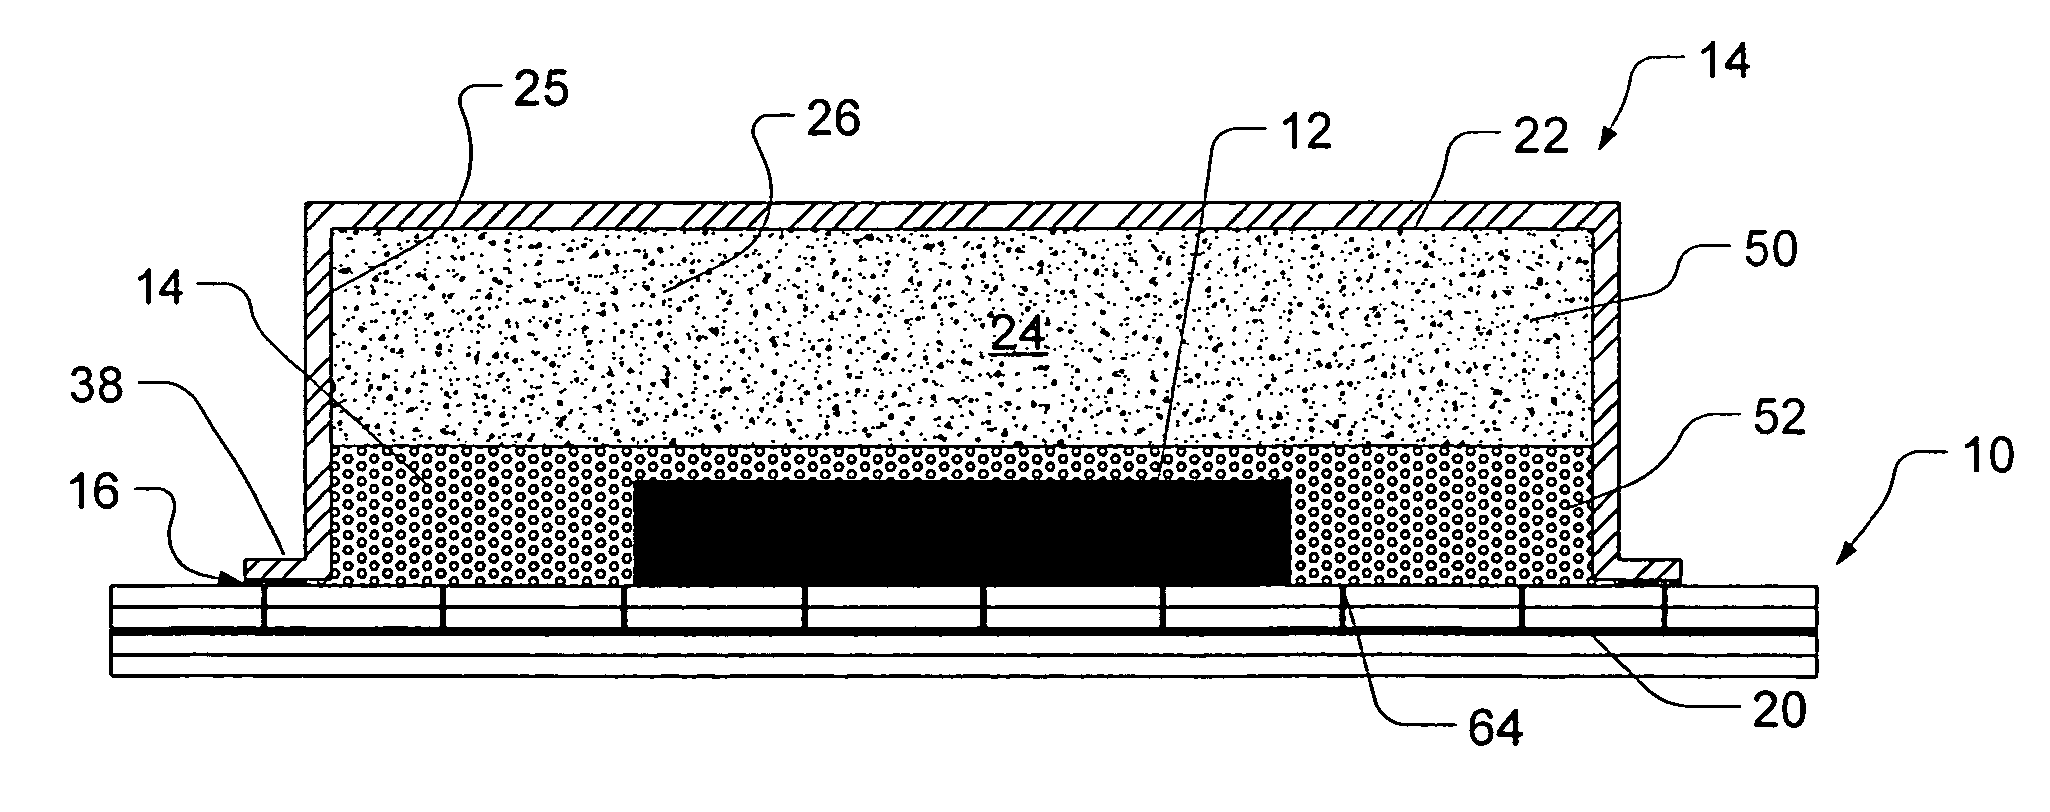 EMI absorbing shielding for a printed circuit board